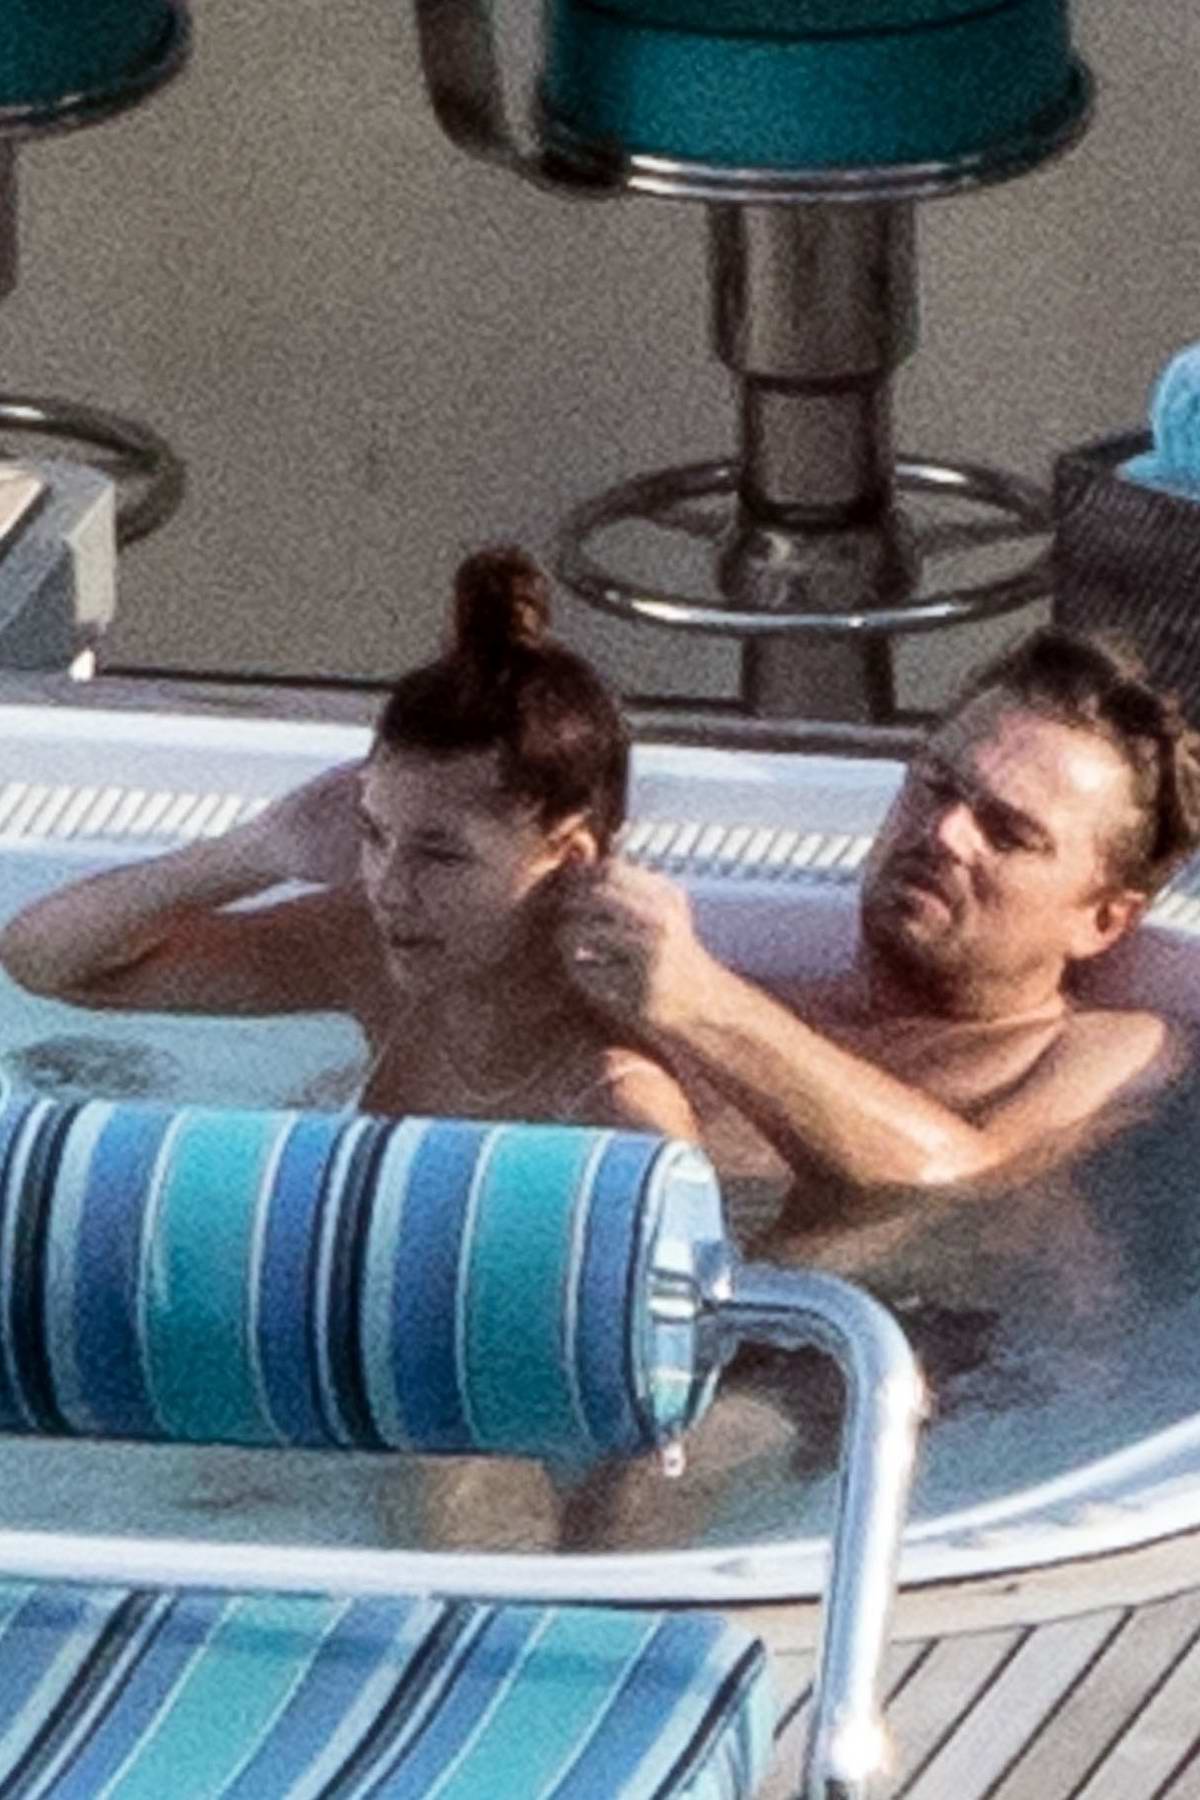 Camila Morrone and Leonardo DiCaprio have a good time in a hot tub while on vacation ...1200 x 1800